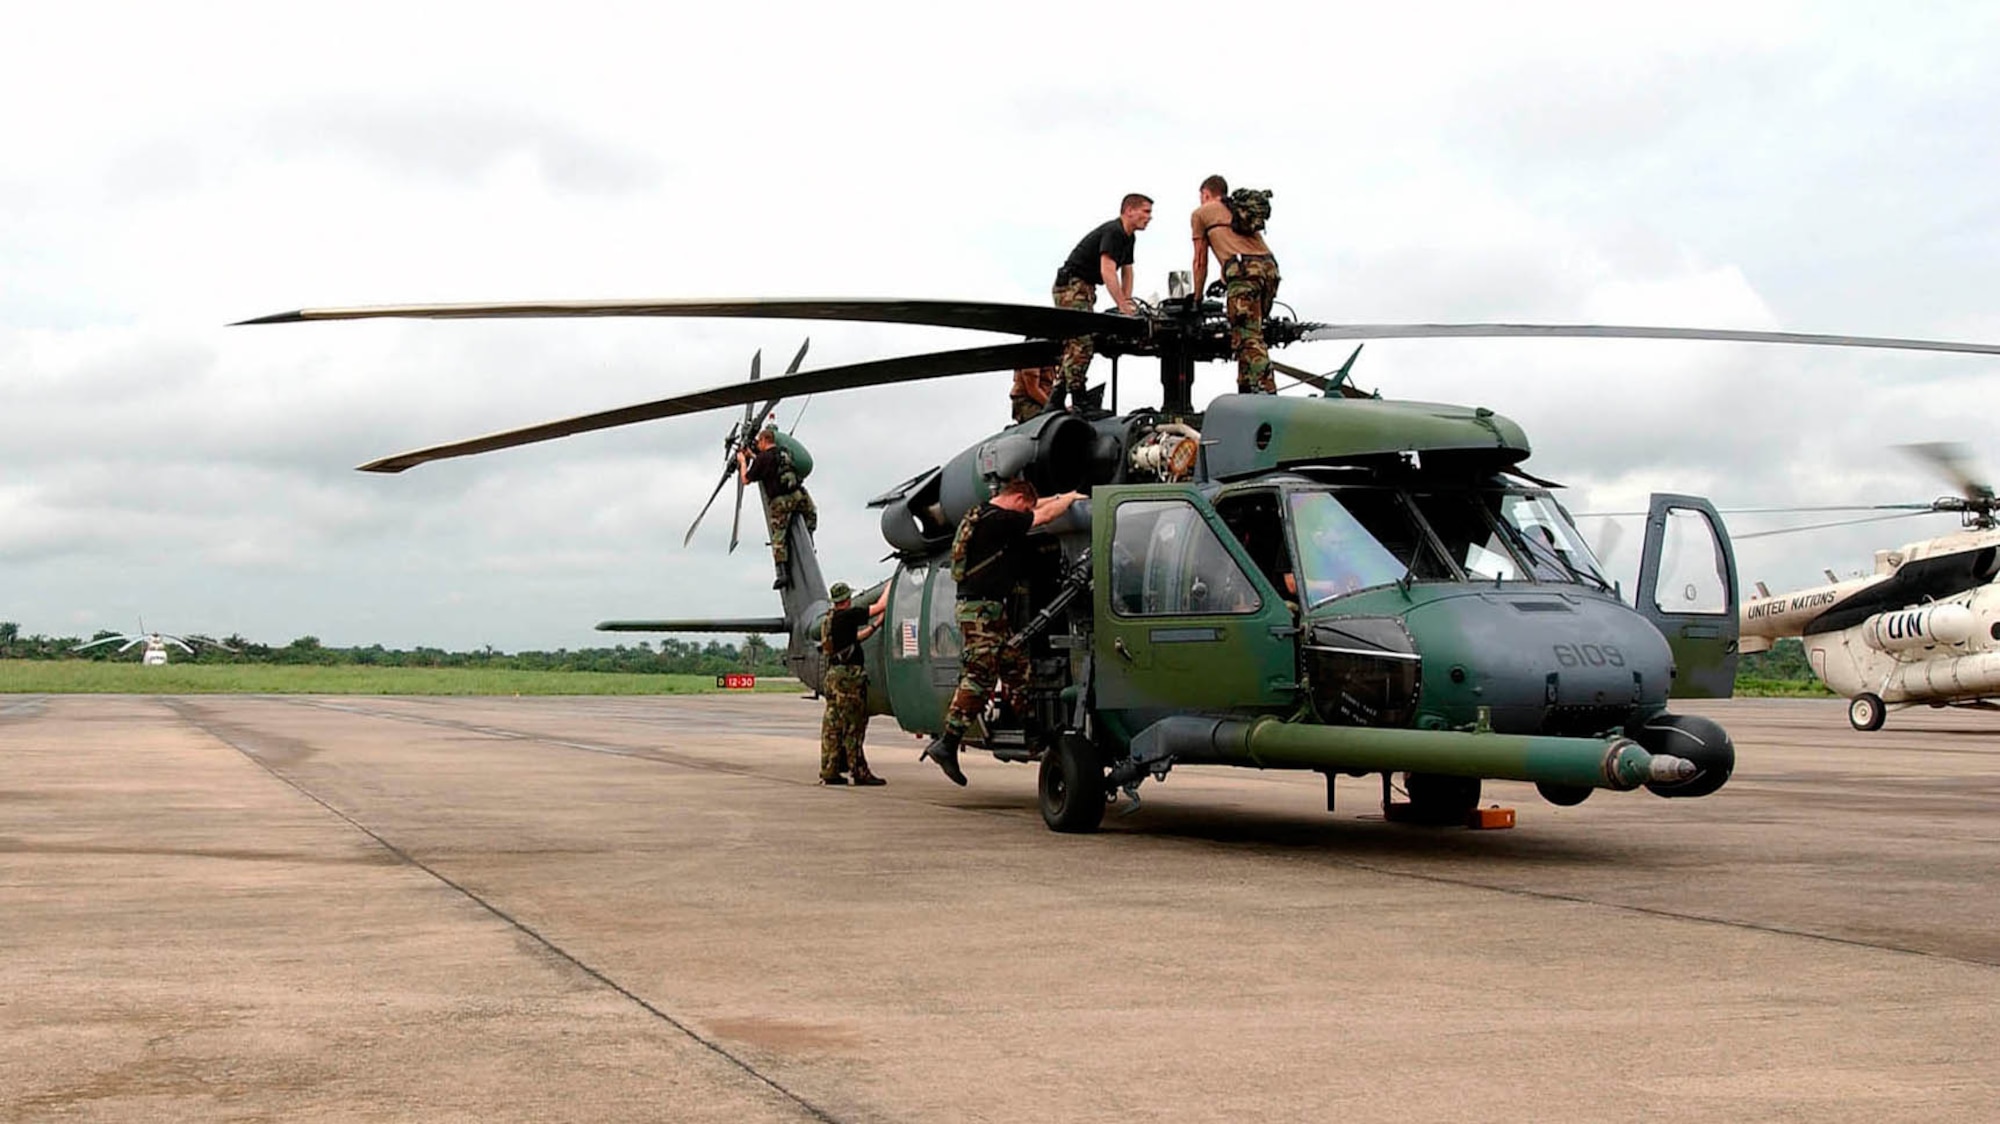 LUNGI, Sierra Leone -- Airmen from the 85th Maintenance Squadron check an Air Force HH-60G Pave Hawk helicopter following a mission July 21.  The mission flew 41 Marines with an antiterrorism security team to the U.S. Embassy at Monrovia, Liberia.  The airmen are part of the 398th Air Expeditionary Group providing recovery and emergency evacuation in Liberia.  The 85th MXS is deployed from Naval Air Station Keflavik, Iceland.  (U.S. Air Force photo by Tech. Sgt. Justin D. Pyle)